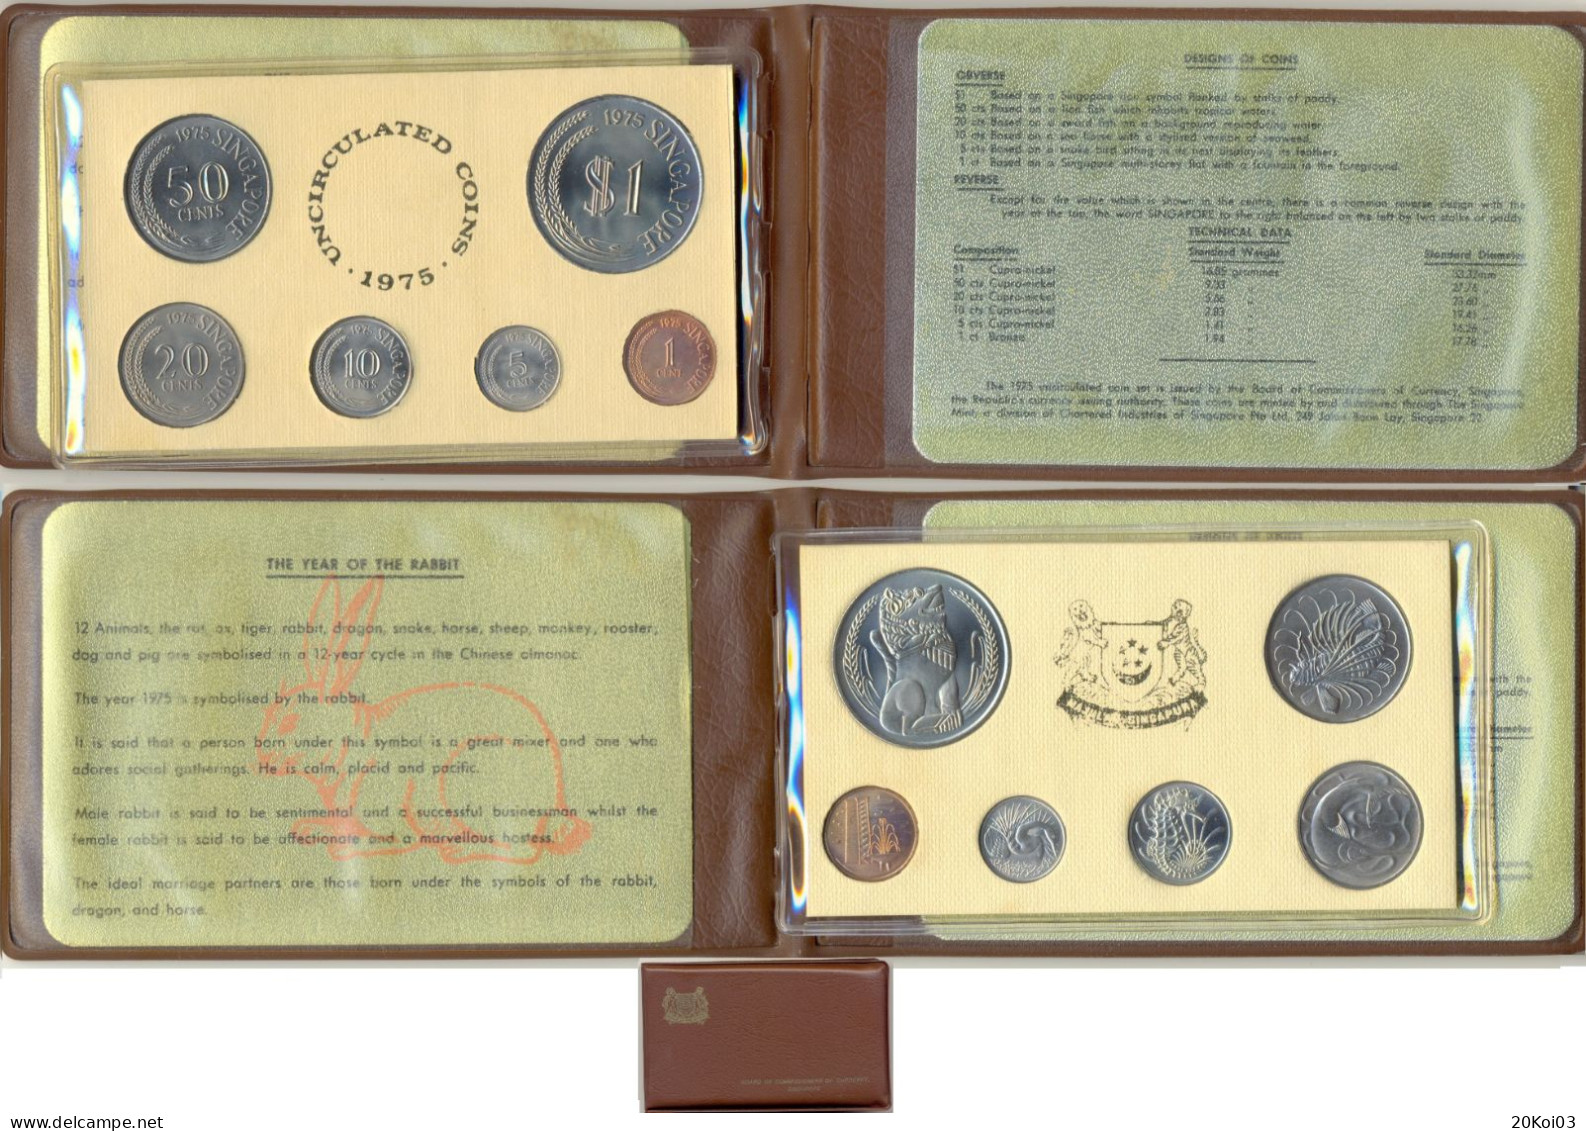 Singapore Coin Set Coins 1975 Uncirculated, The Year Of The Rabbit, Board Of Commissioners Of Currency_SUP - Singapur